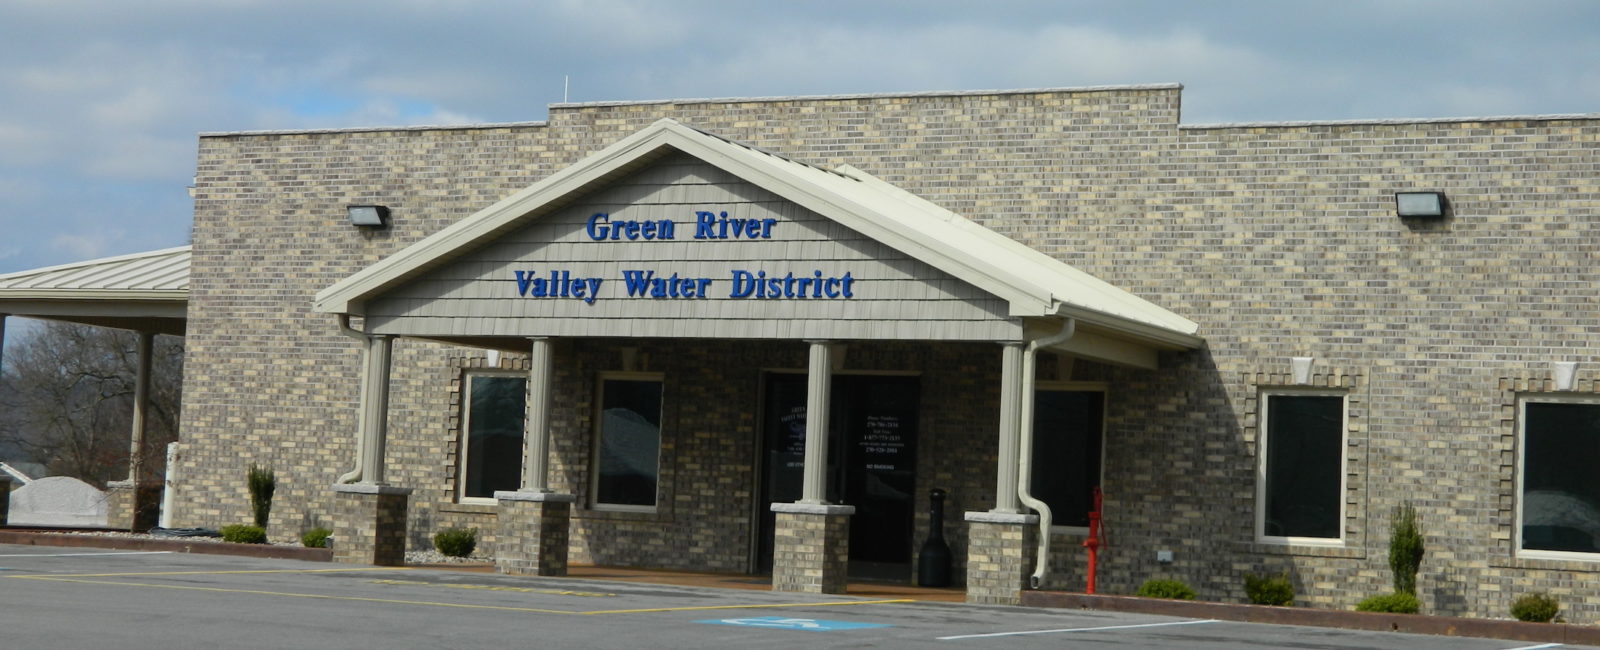 Green River Valley Water